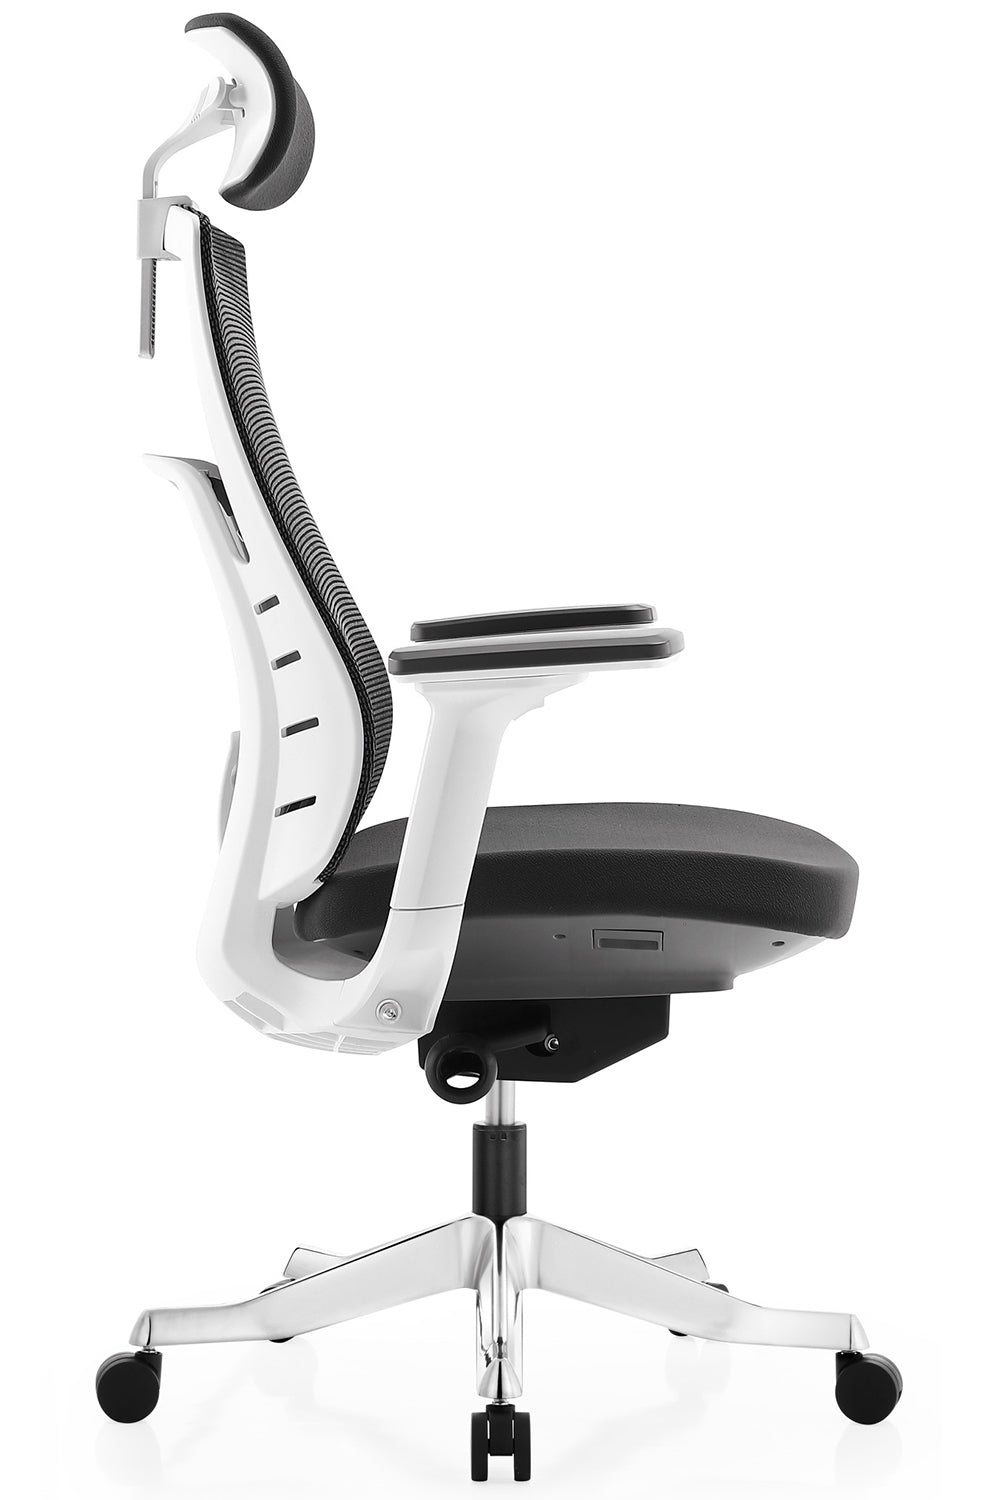 Apollo High Back 3D Workstation Swivel Chair with Cushion Seat And Aluminum die cast Base  - White